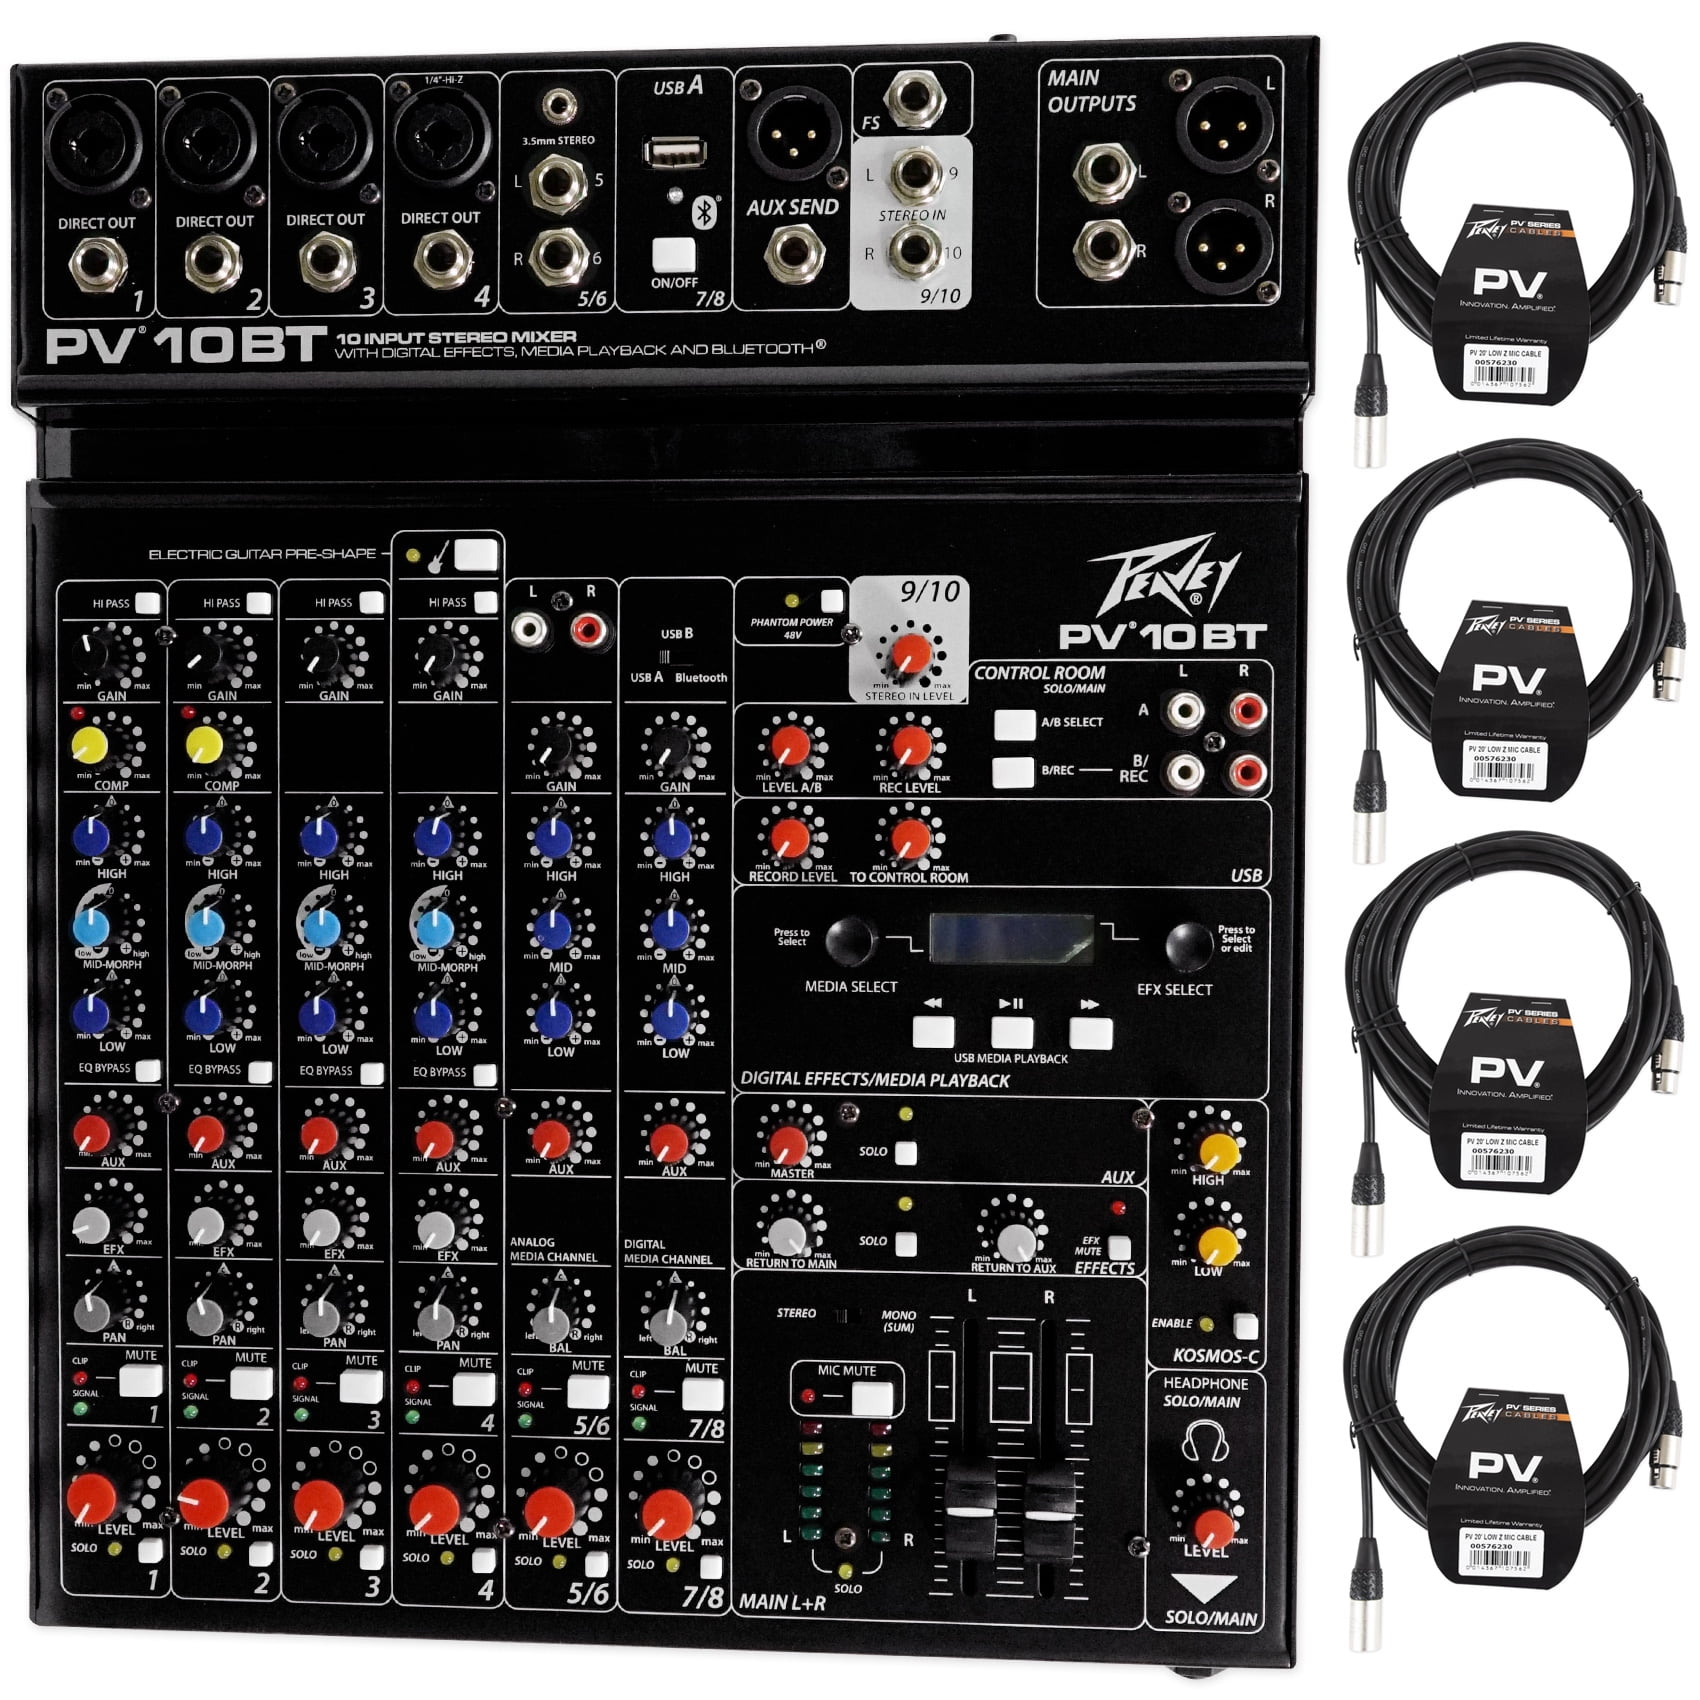 10BT　In,Bluetooth/USB,Compressor/Effects+XLR　Peavey　PV10BT　mic　PV　Mixer,4　Cables